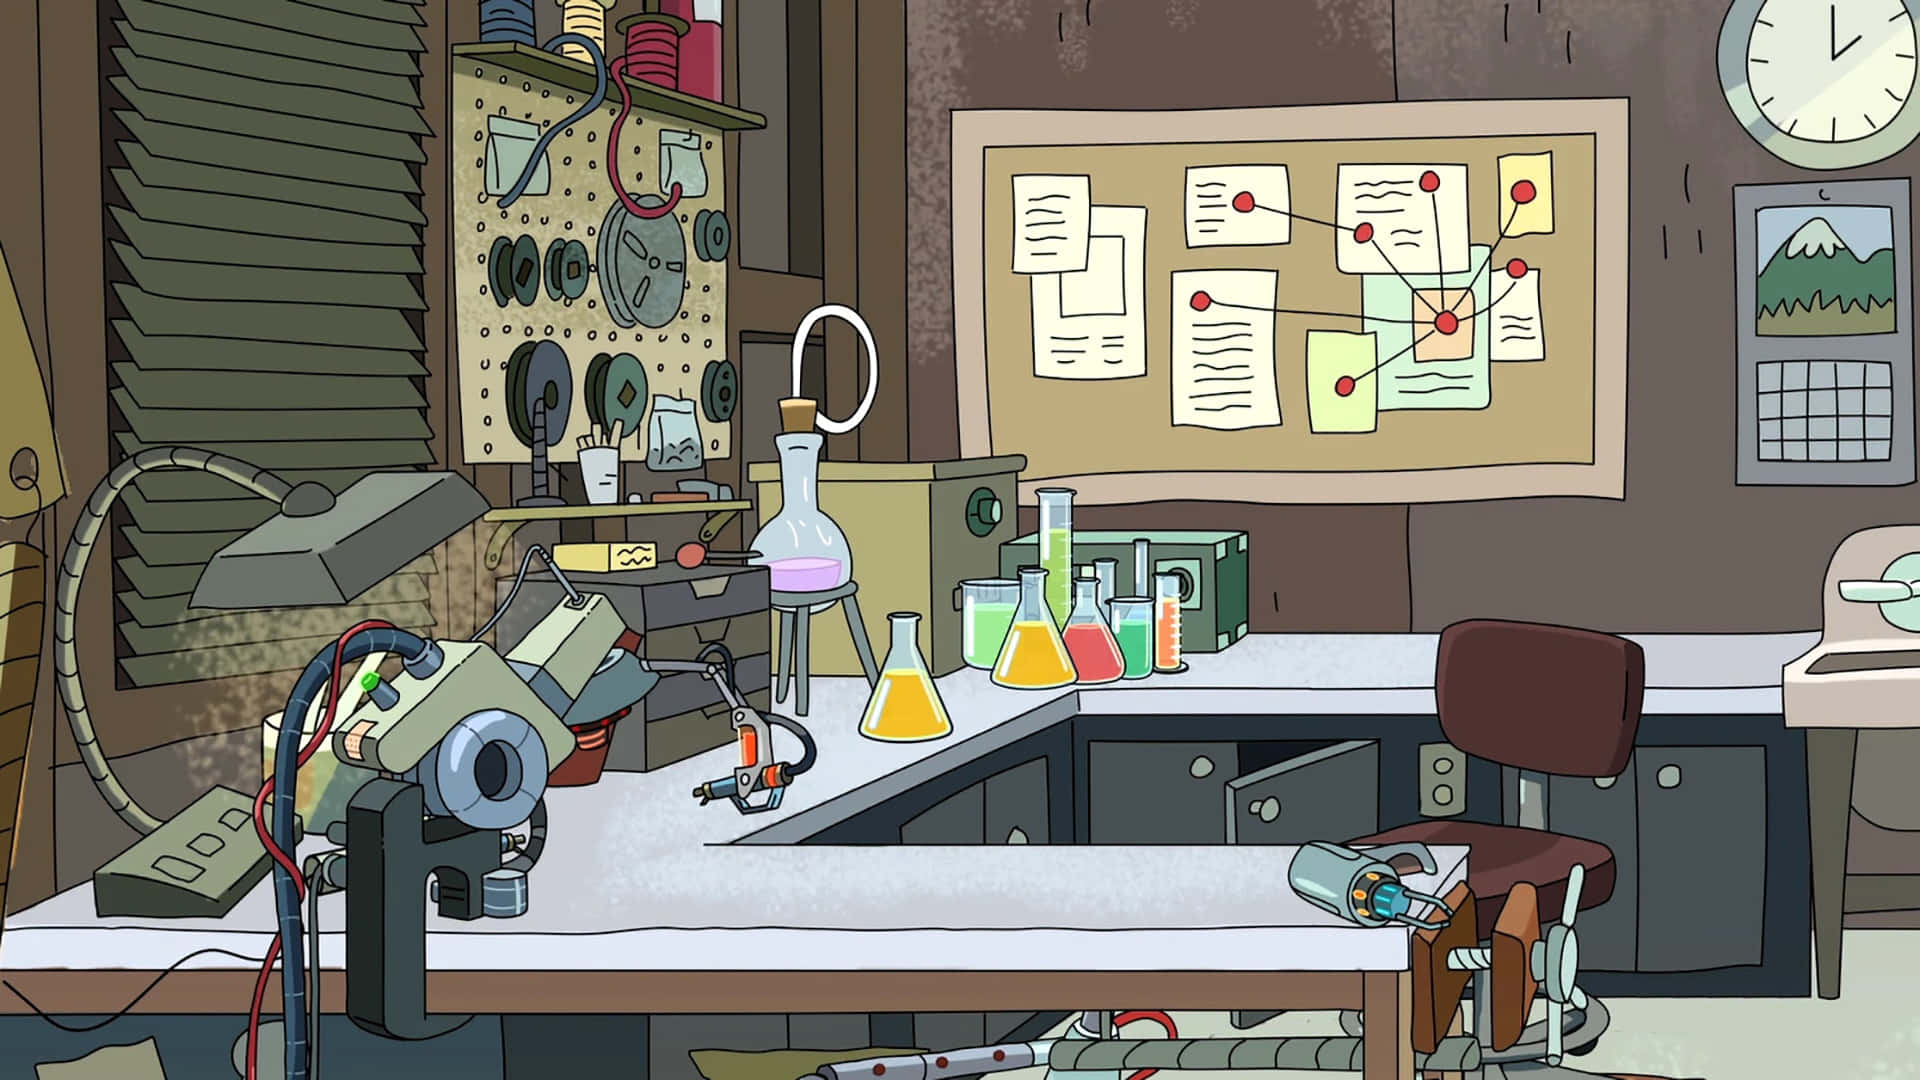 A Cartoon Image Of A Lab With A Lot Of Equipment